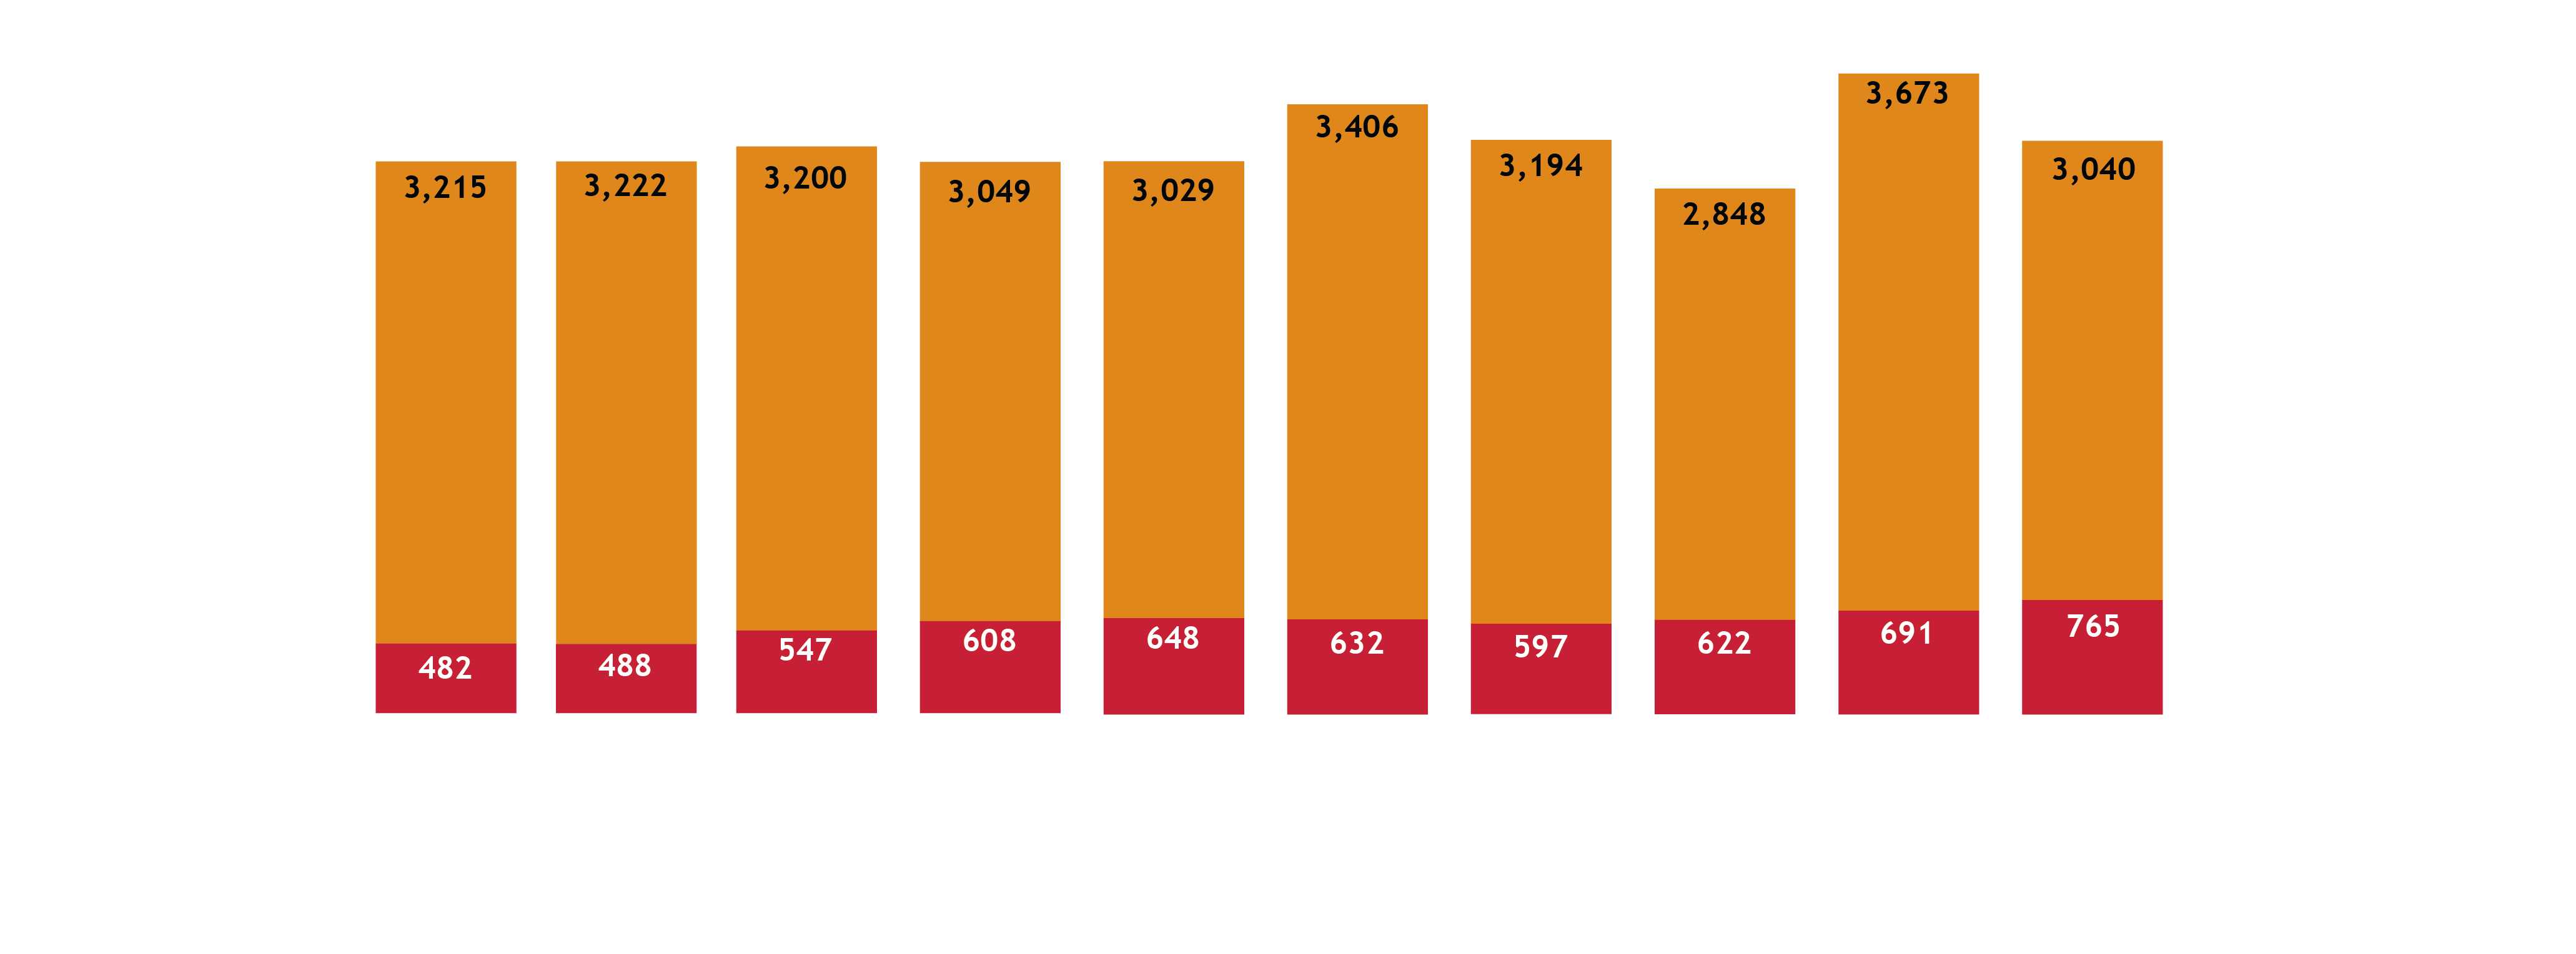 Graph of fatalities and serious injuries for each year from 2013 through 2022. Includes text let's get to zero, with an arrow pointing to where zero would be on the graph in a future year. For exact data shown in the graph, reference the data table in the next tab. 